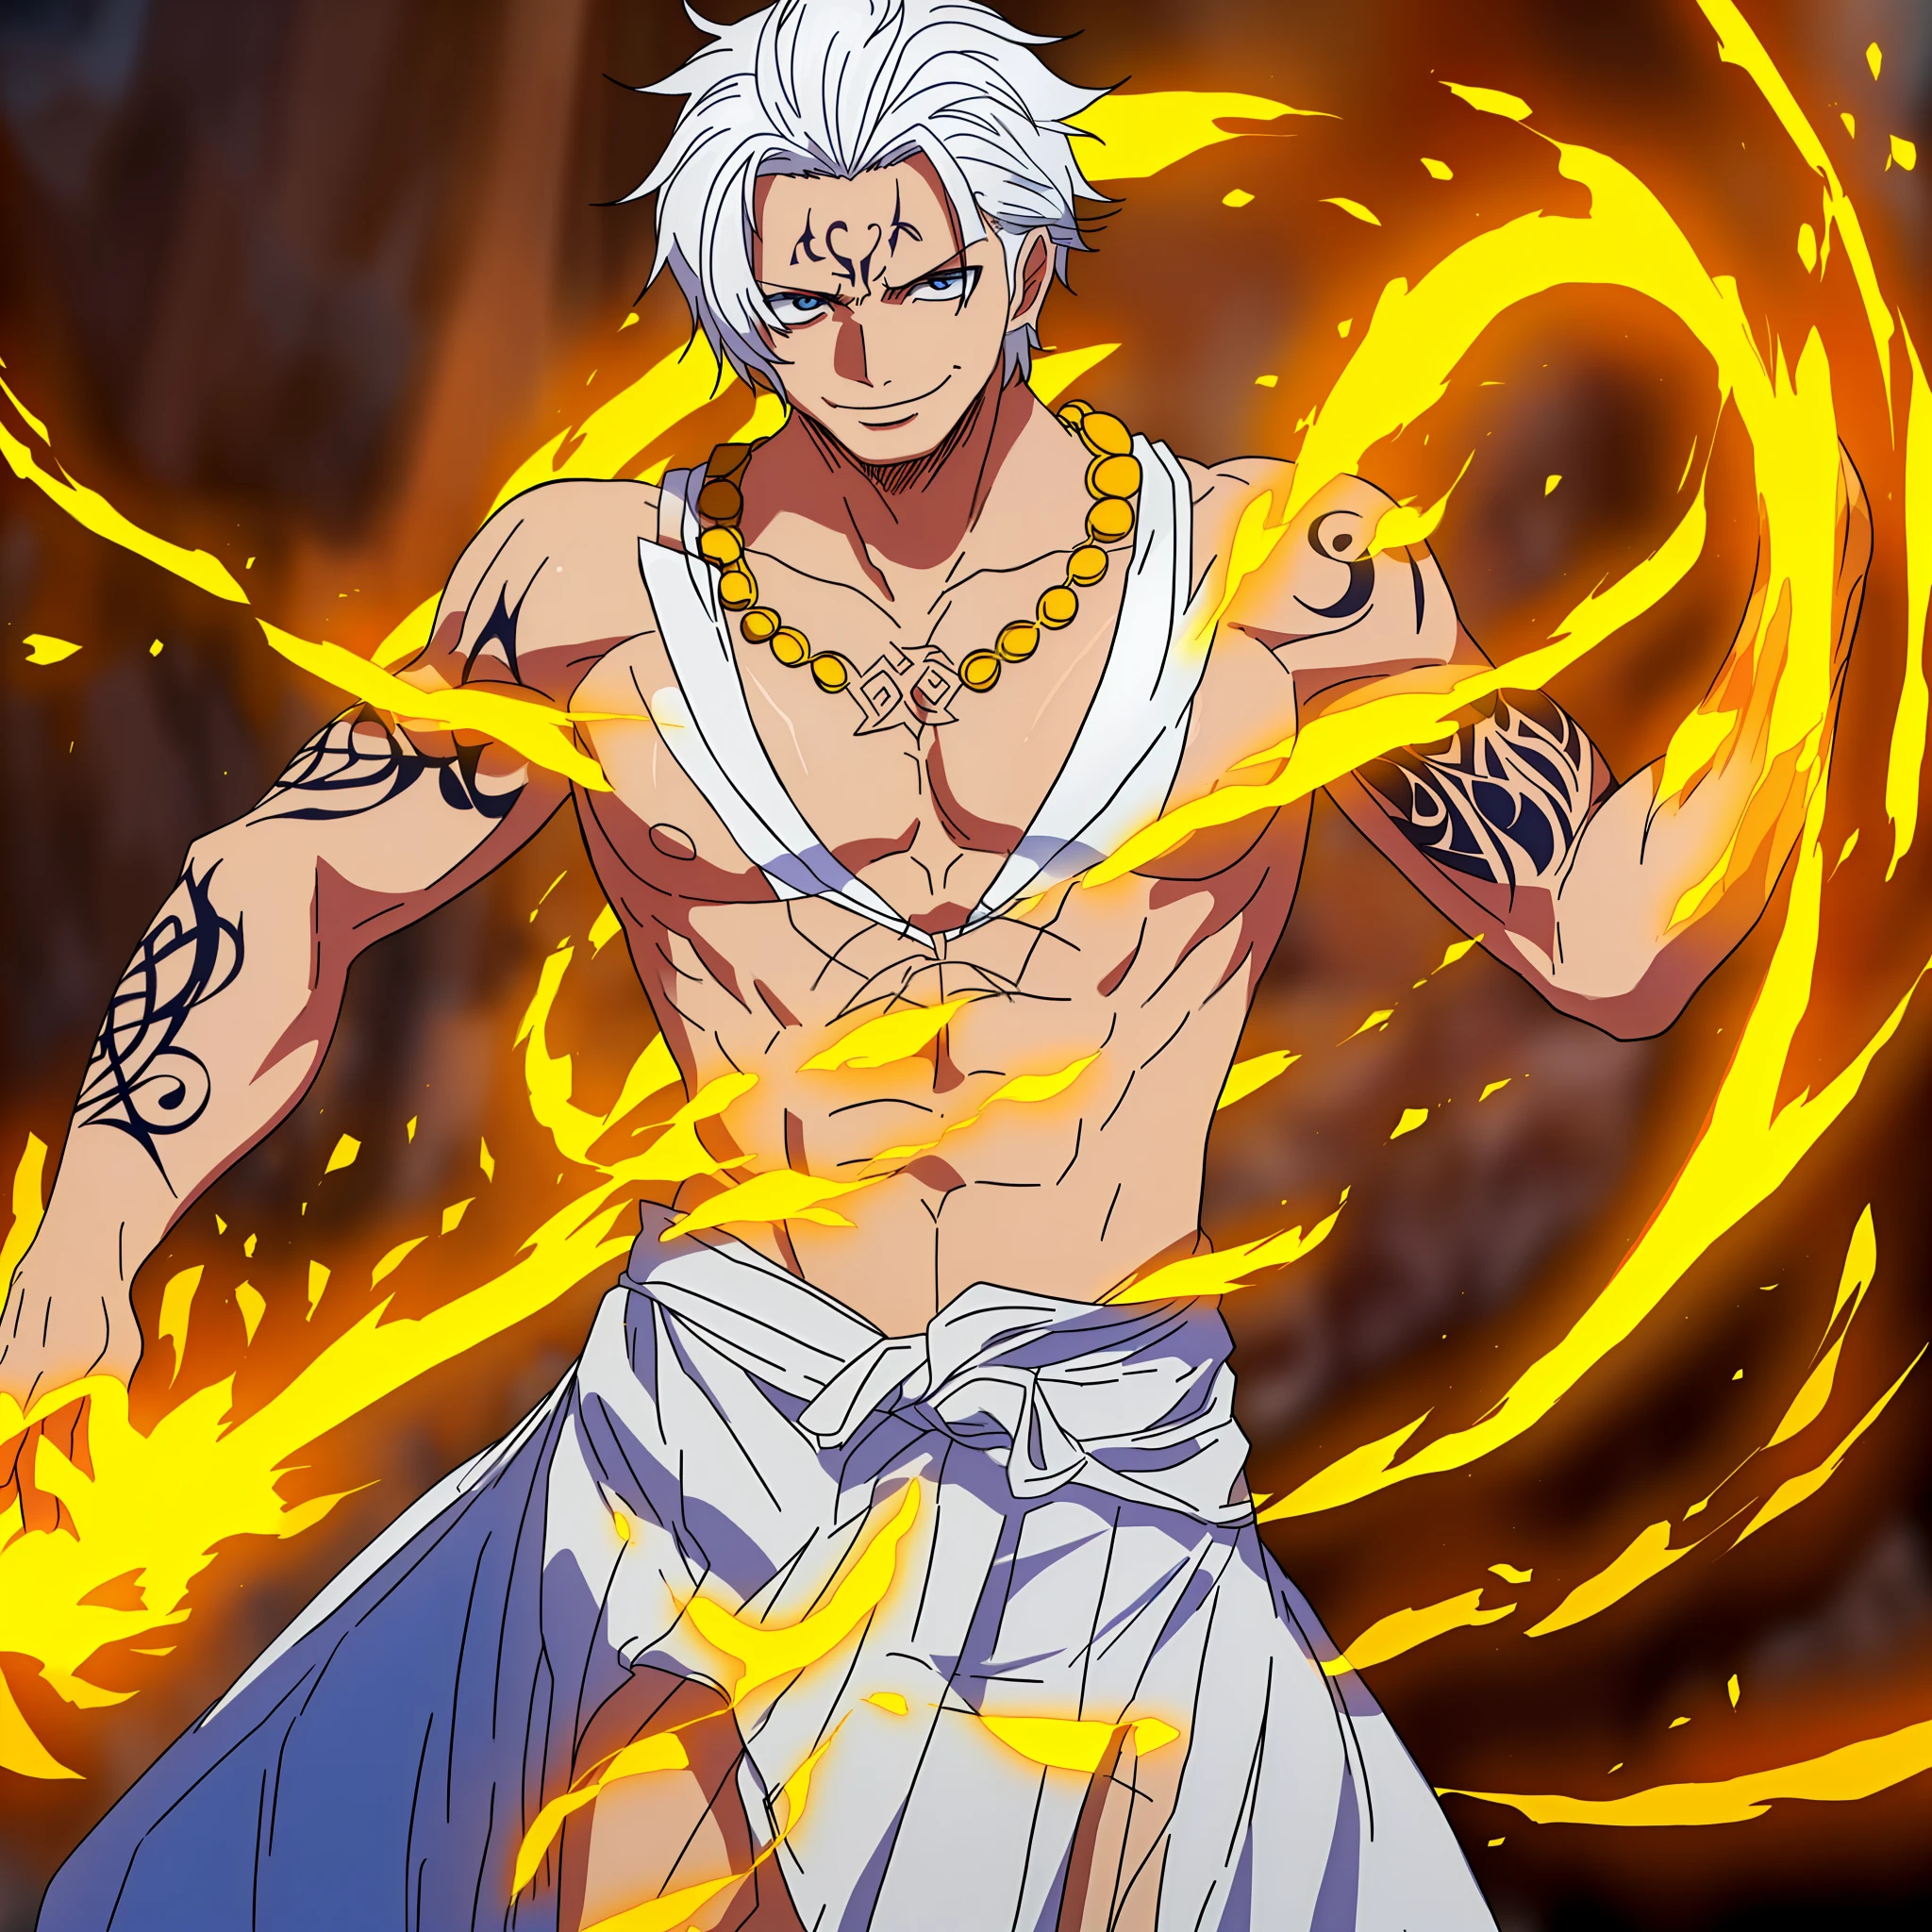 A young man with a thin face and good physique, possesses long, messy white hair, possesses tribal-style tattoos and a proud smile, wears no superior clothing, wears a Greek-style skirt ornamented with gold, as well as gold accessories such as a necklace around his neck